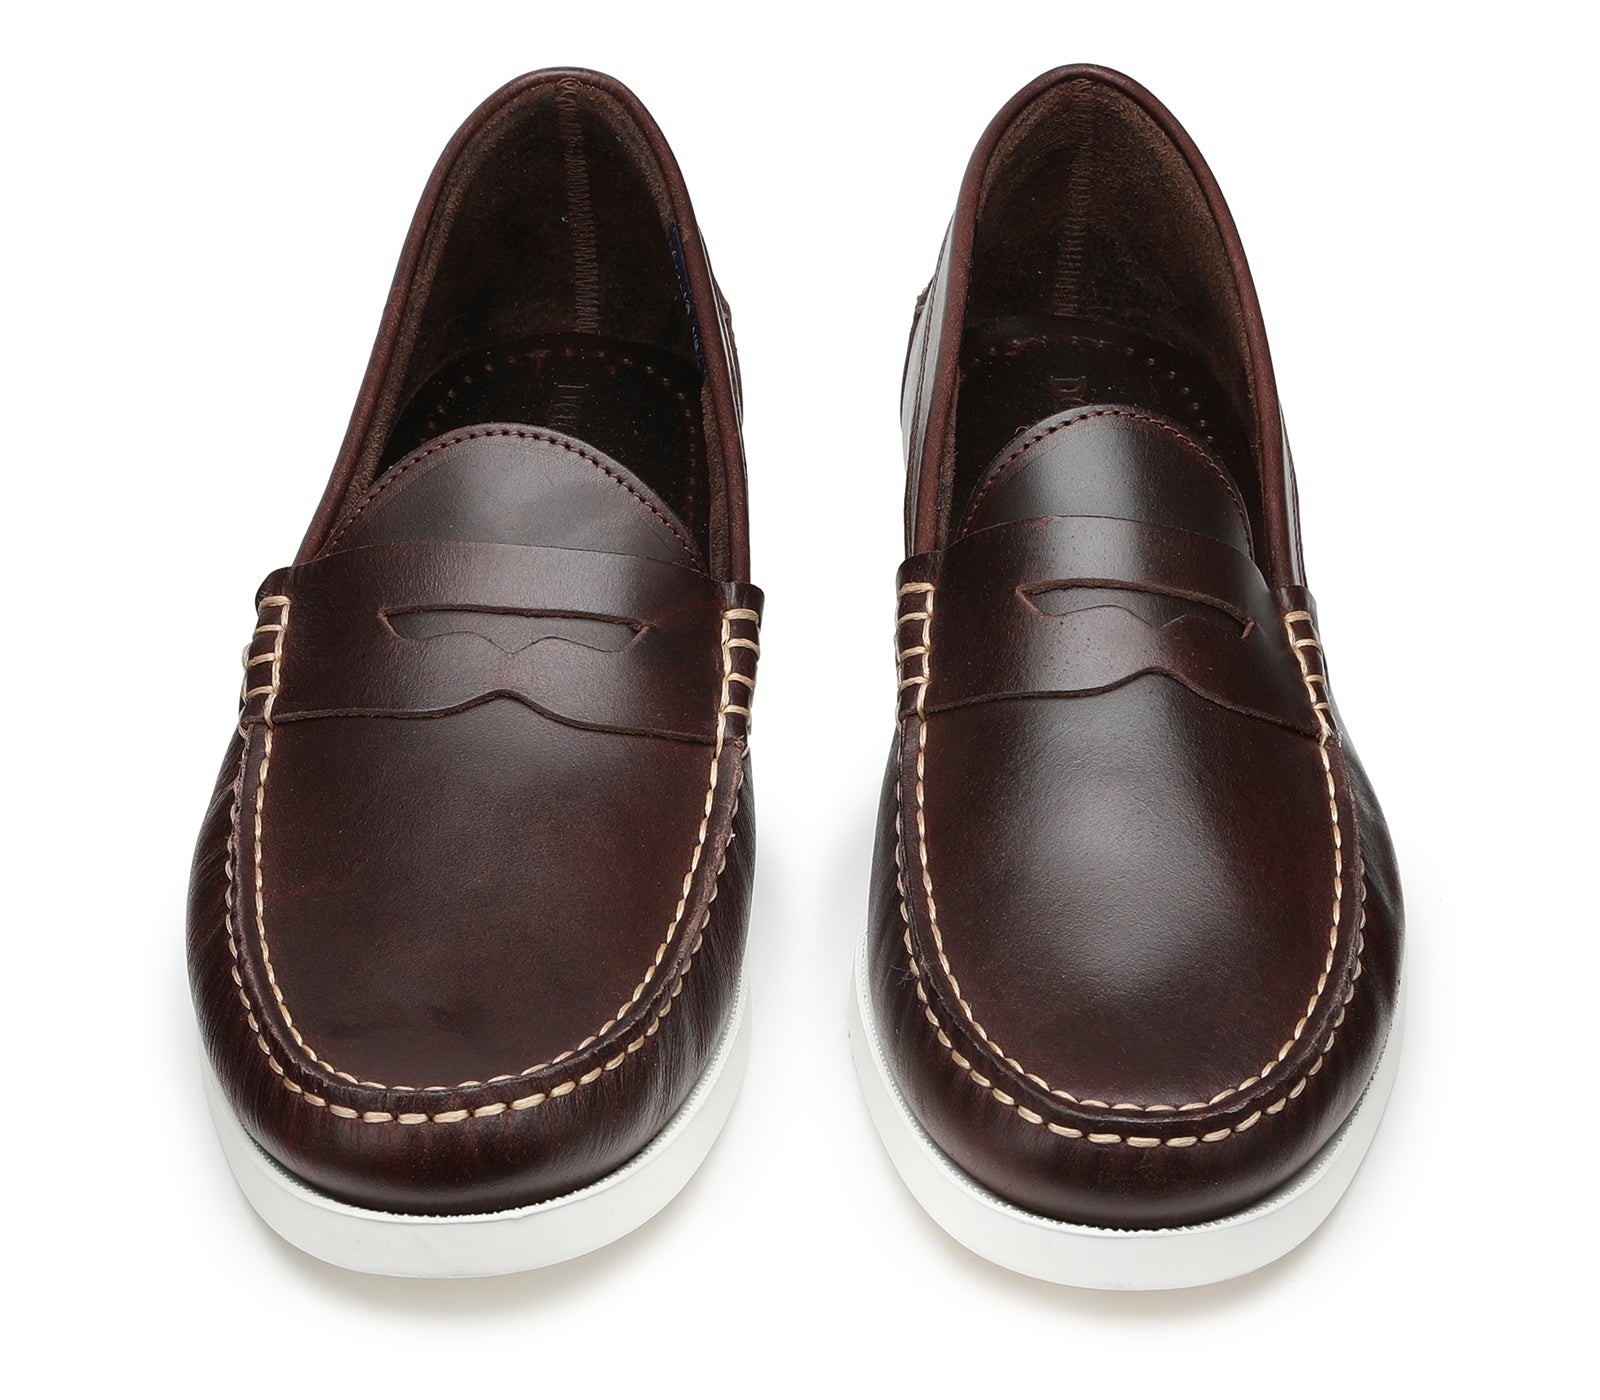 Men's Moccasins in Brown Leather